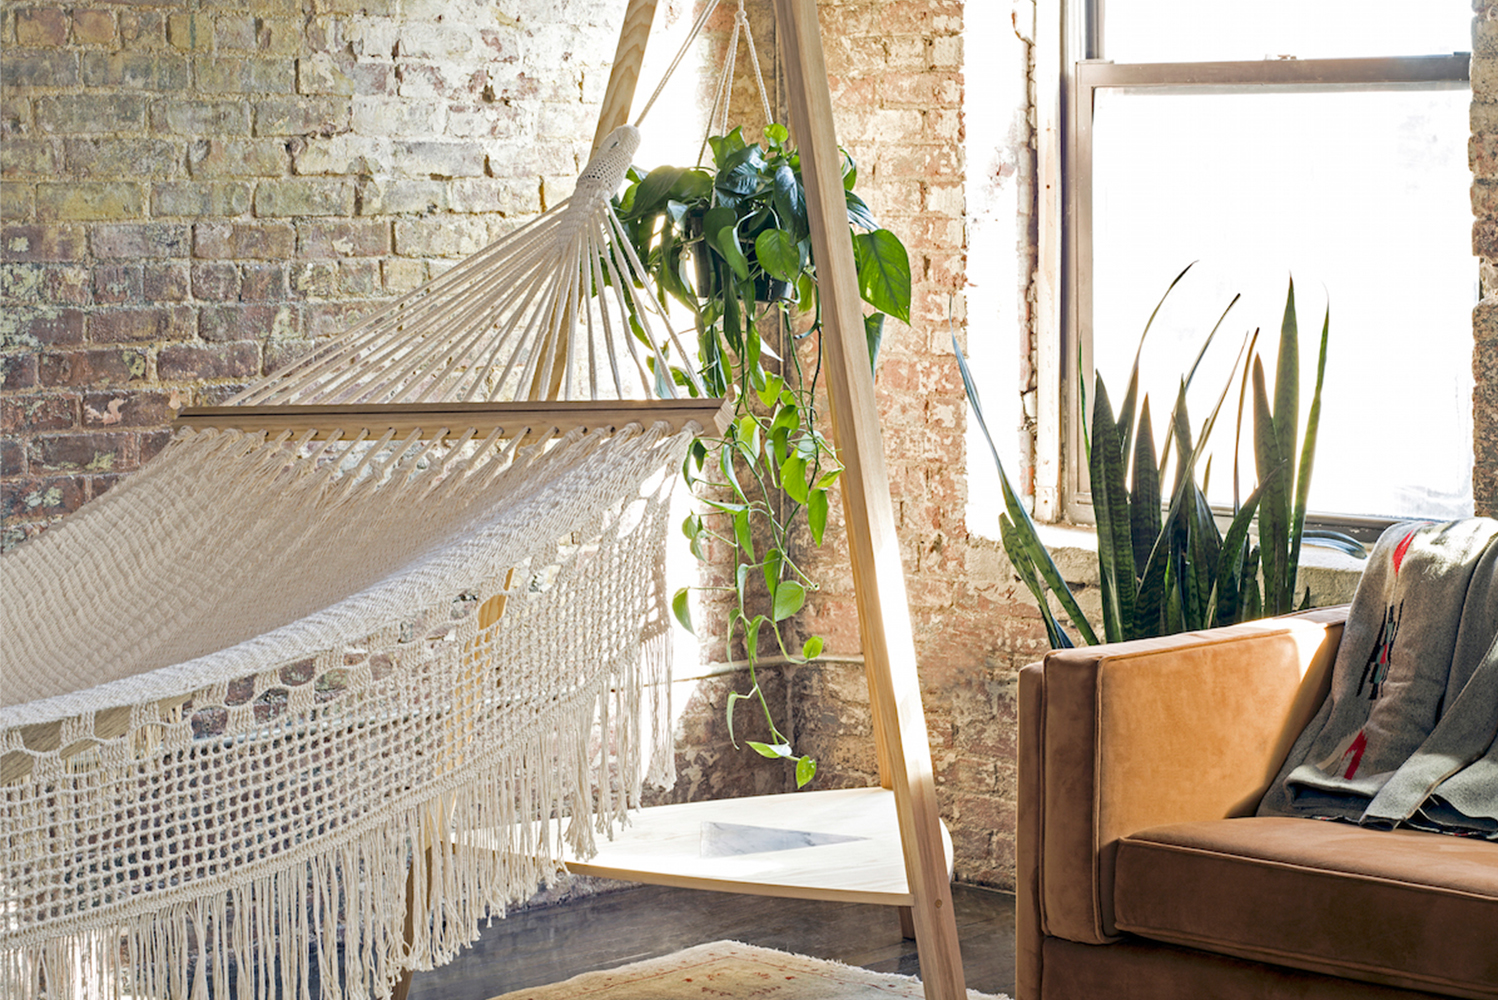 Brooklyn-based furniture design collective Pouch launched a collection of indoor hammocks and hanging chairs 